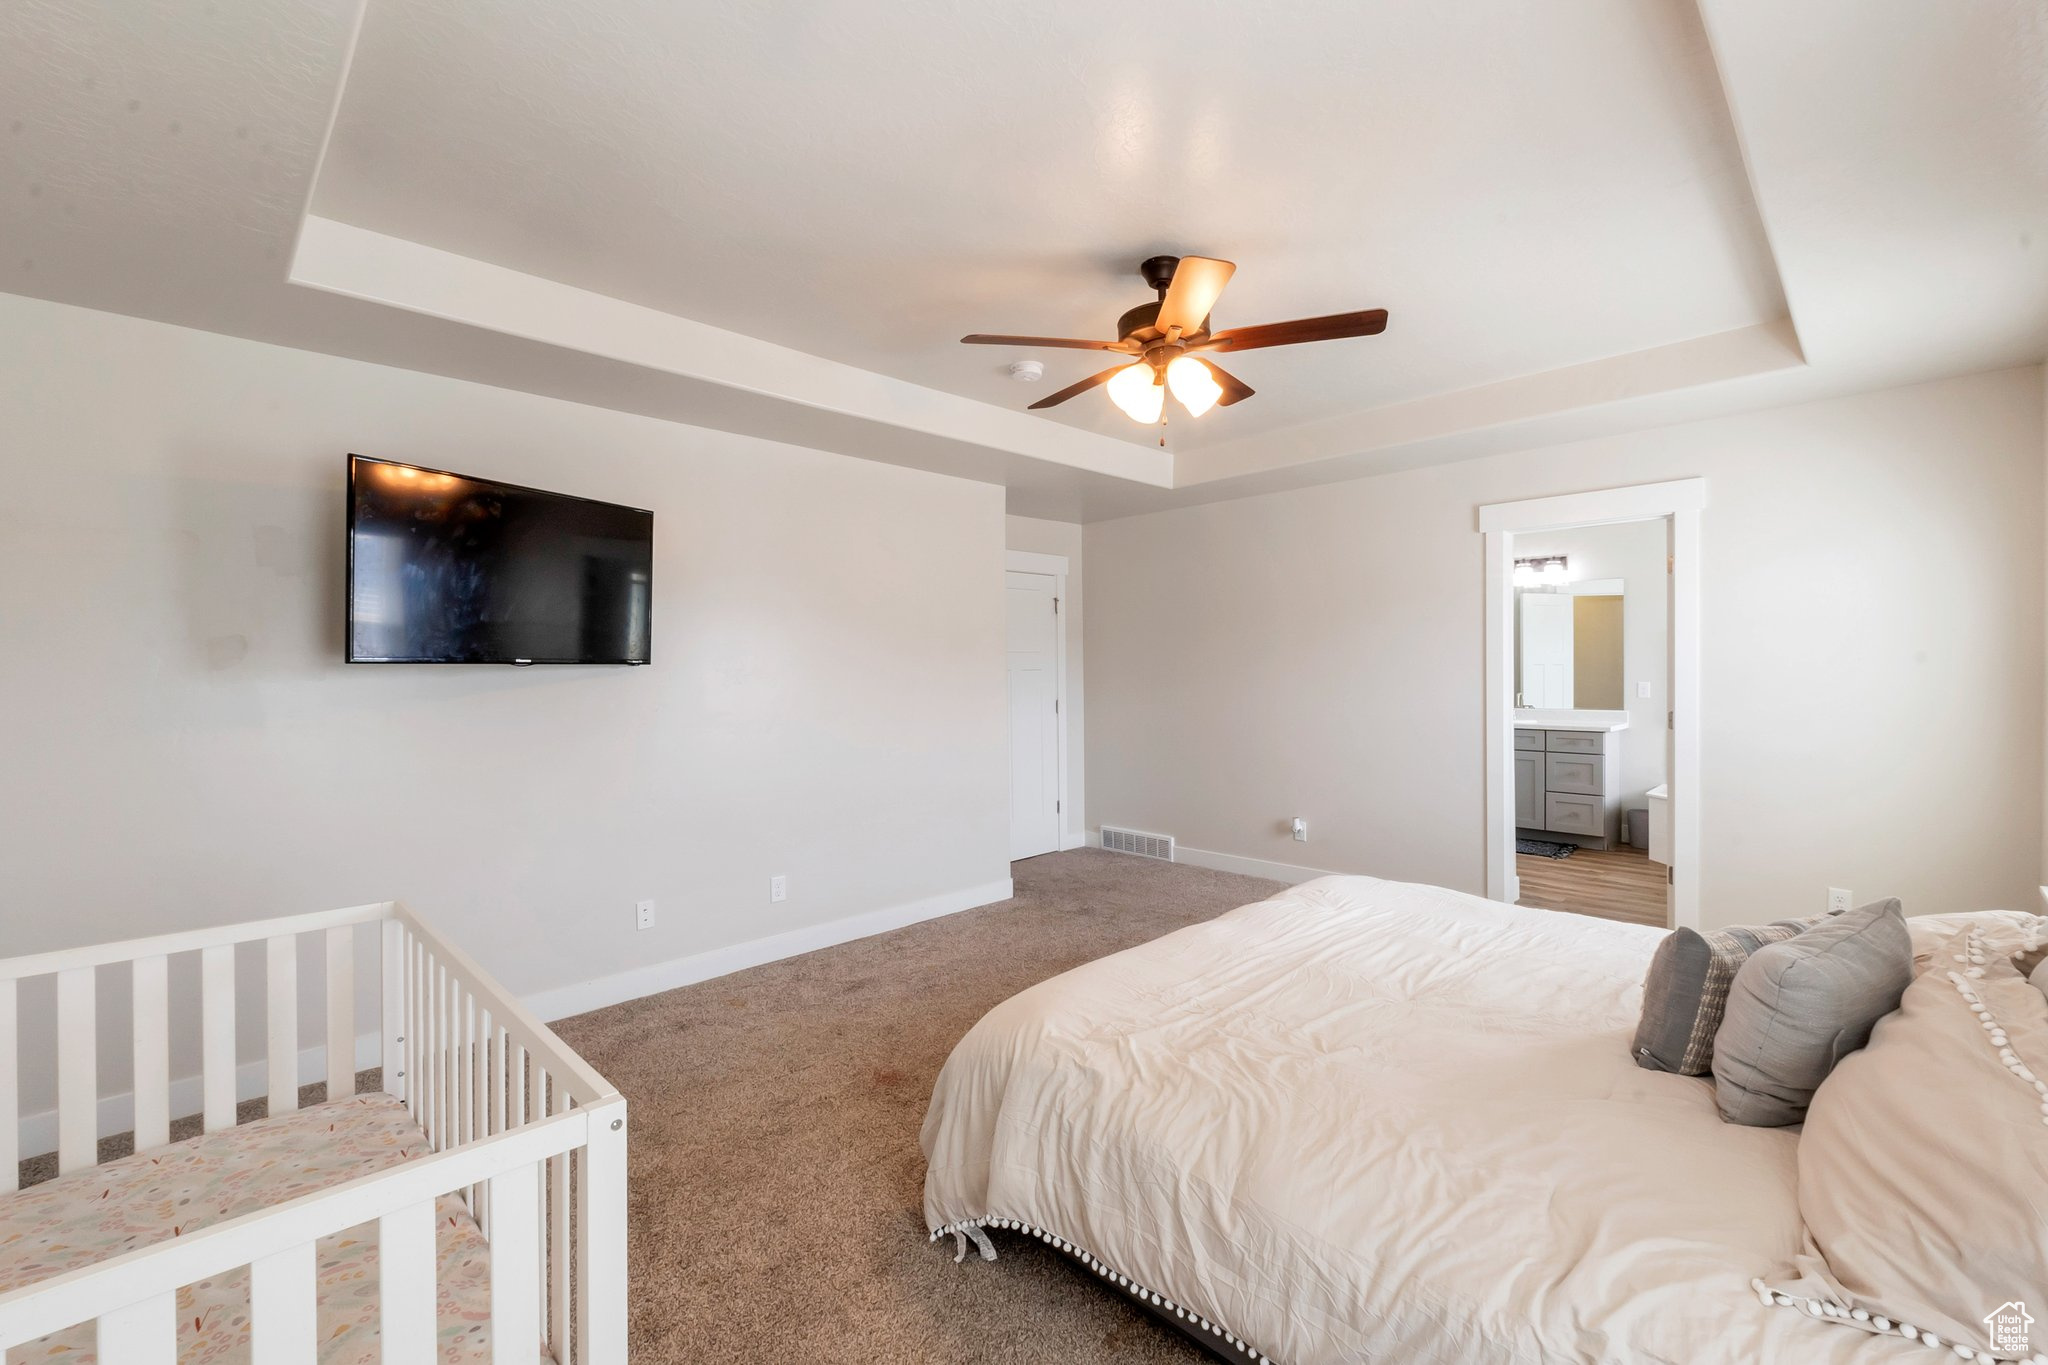 Carpeted bedroom featuring ensuite bathroom, ceiling fan, and a tray ceiling